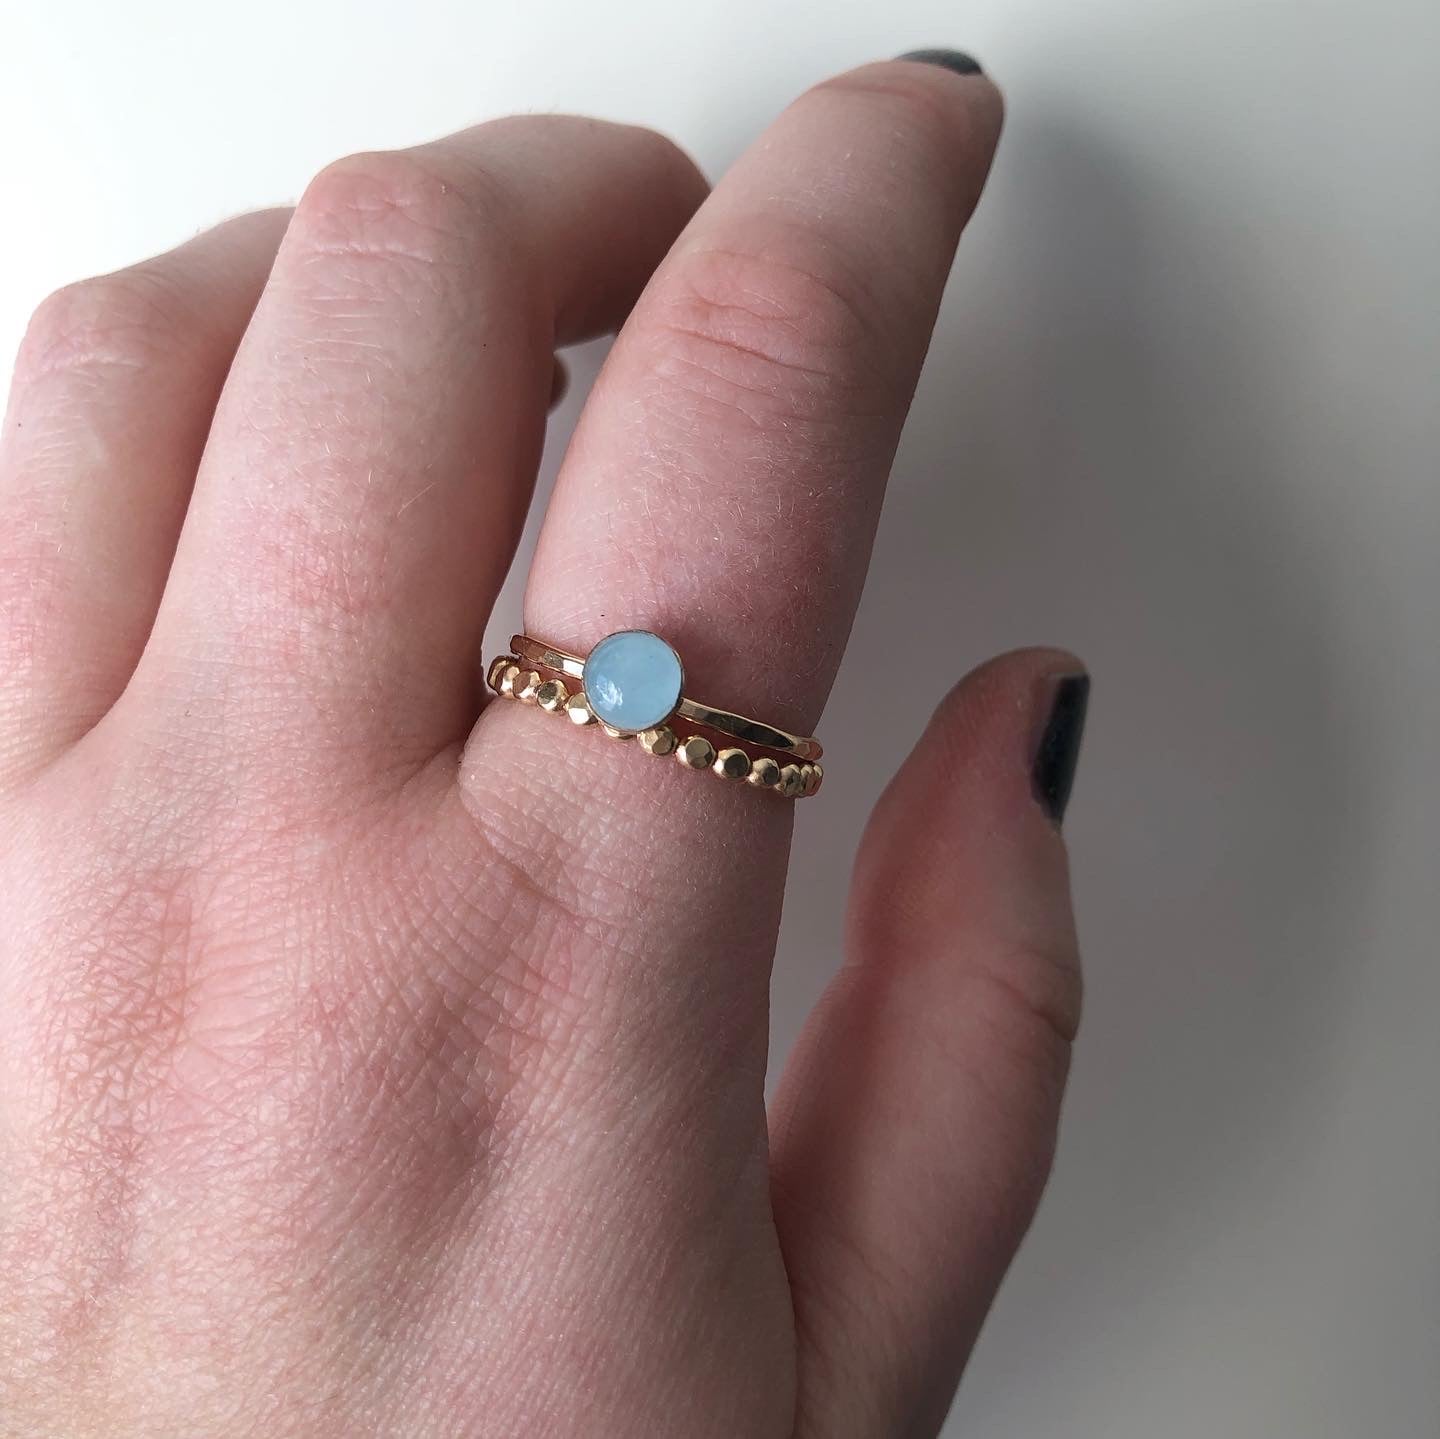 Two rings worn by a model with dark nailpolish. One is a gold-filled beaded band. The other is a hammered gold-filled band set with a pale blue aquamarine in a bezel. 